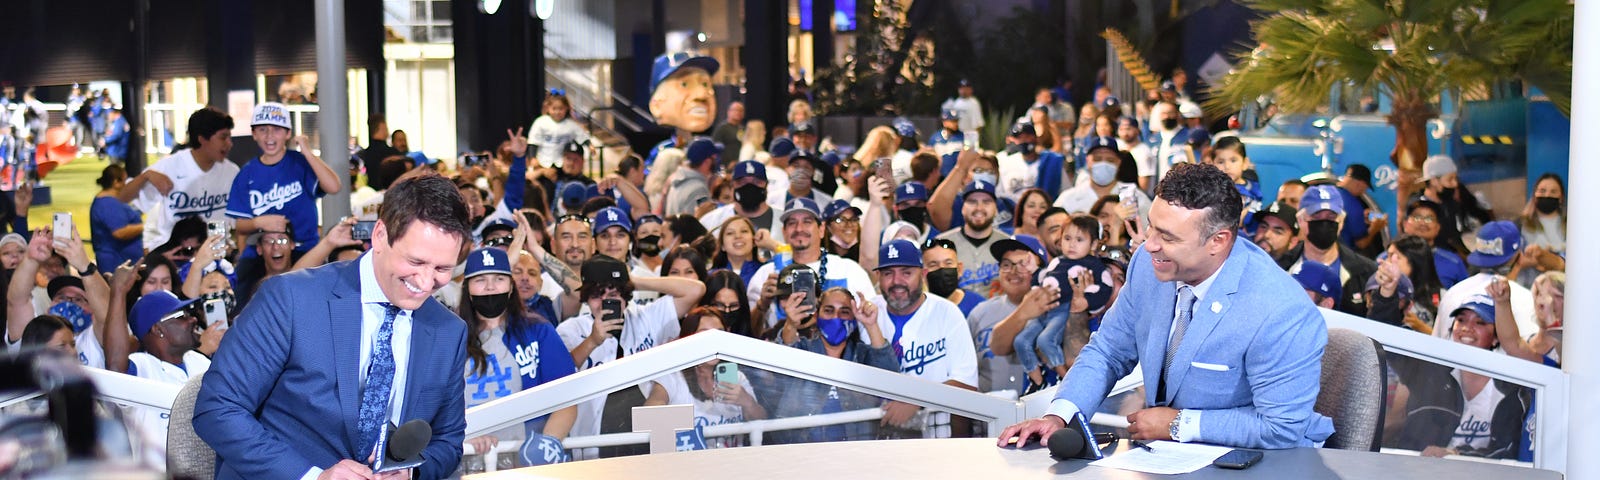 Dodger fans create a welcome home that Freddie Freeman won't forget, by  Rowan Kavner